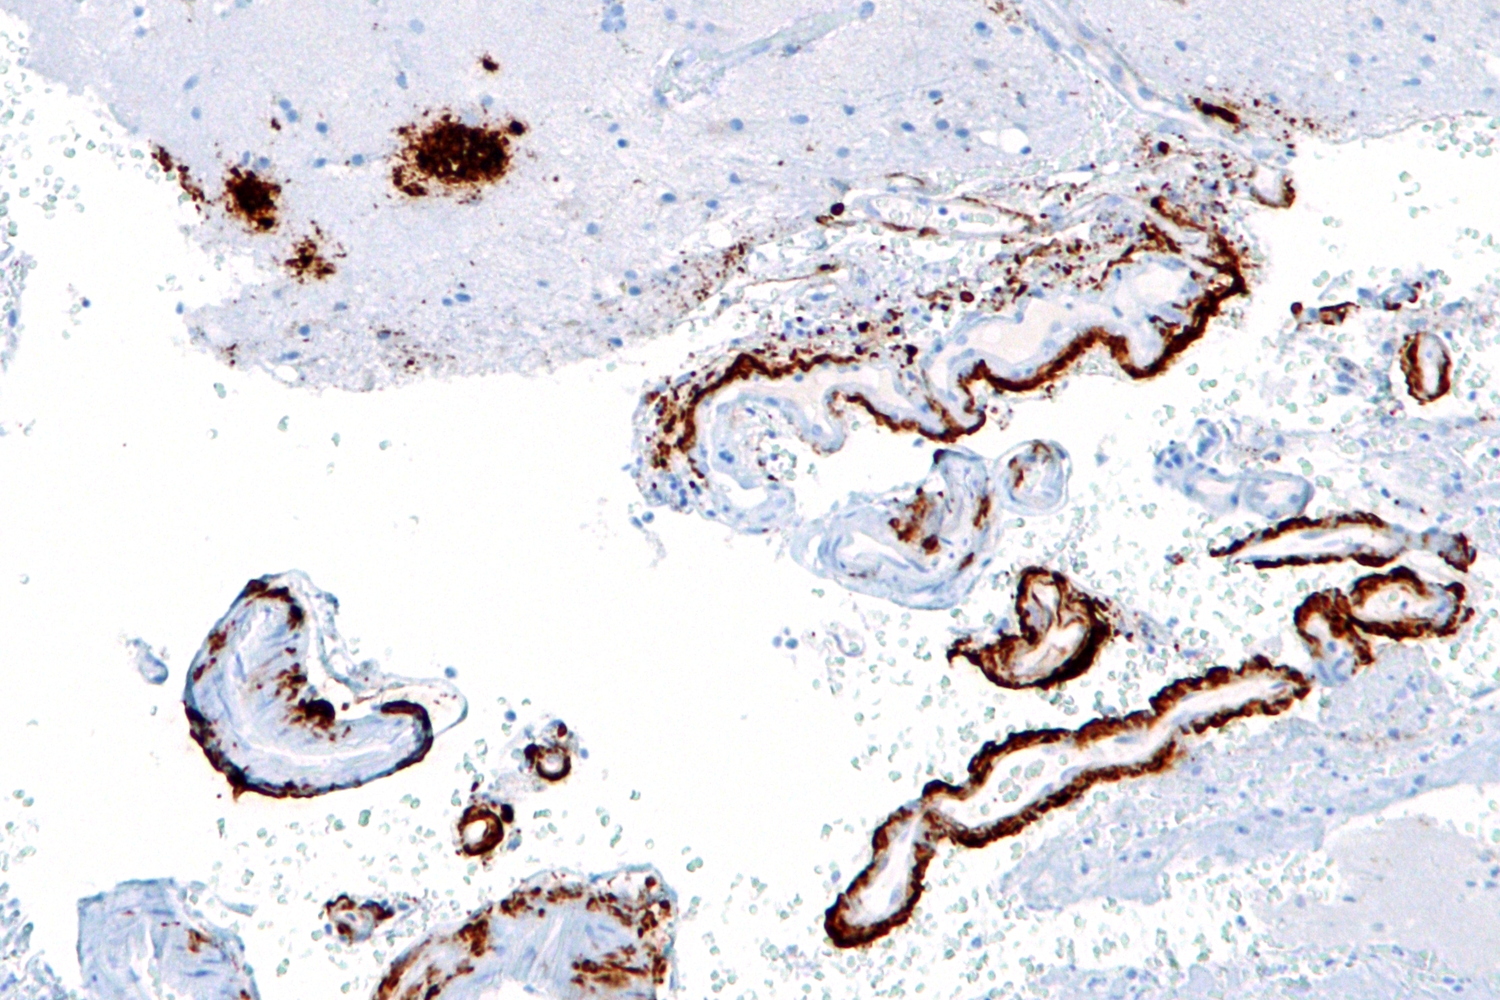 Amyloid beta plaques